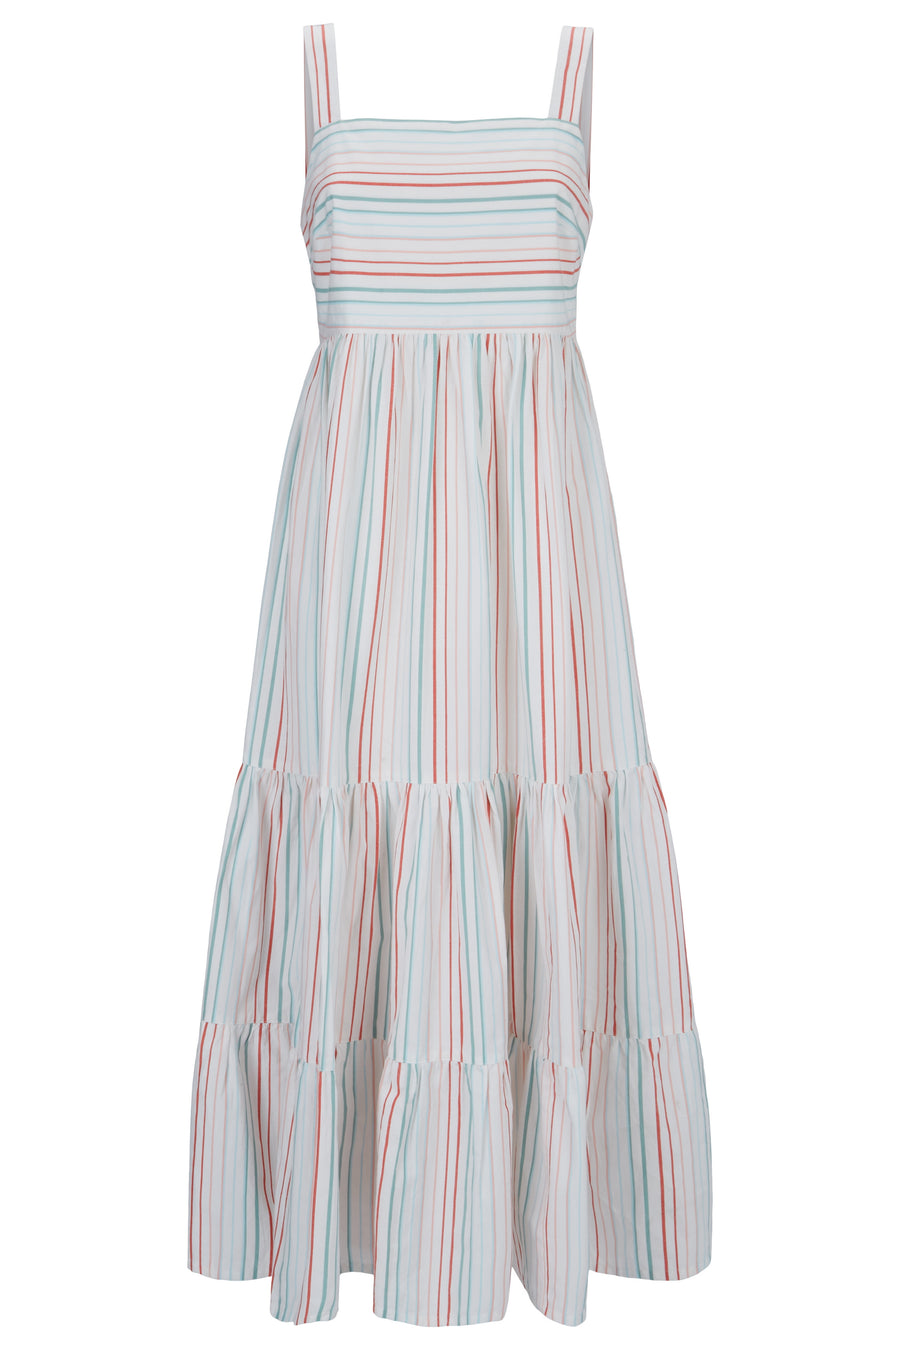 People Tree Fair Trade, Ethical & Sustainable Lea Striped Dress in Multi coloured 100% Organic Cotton